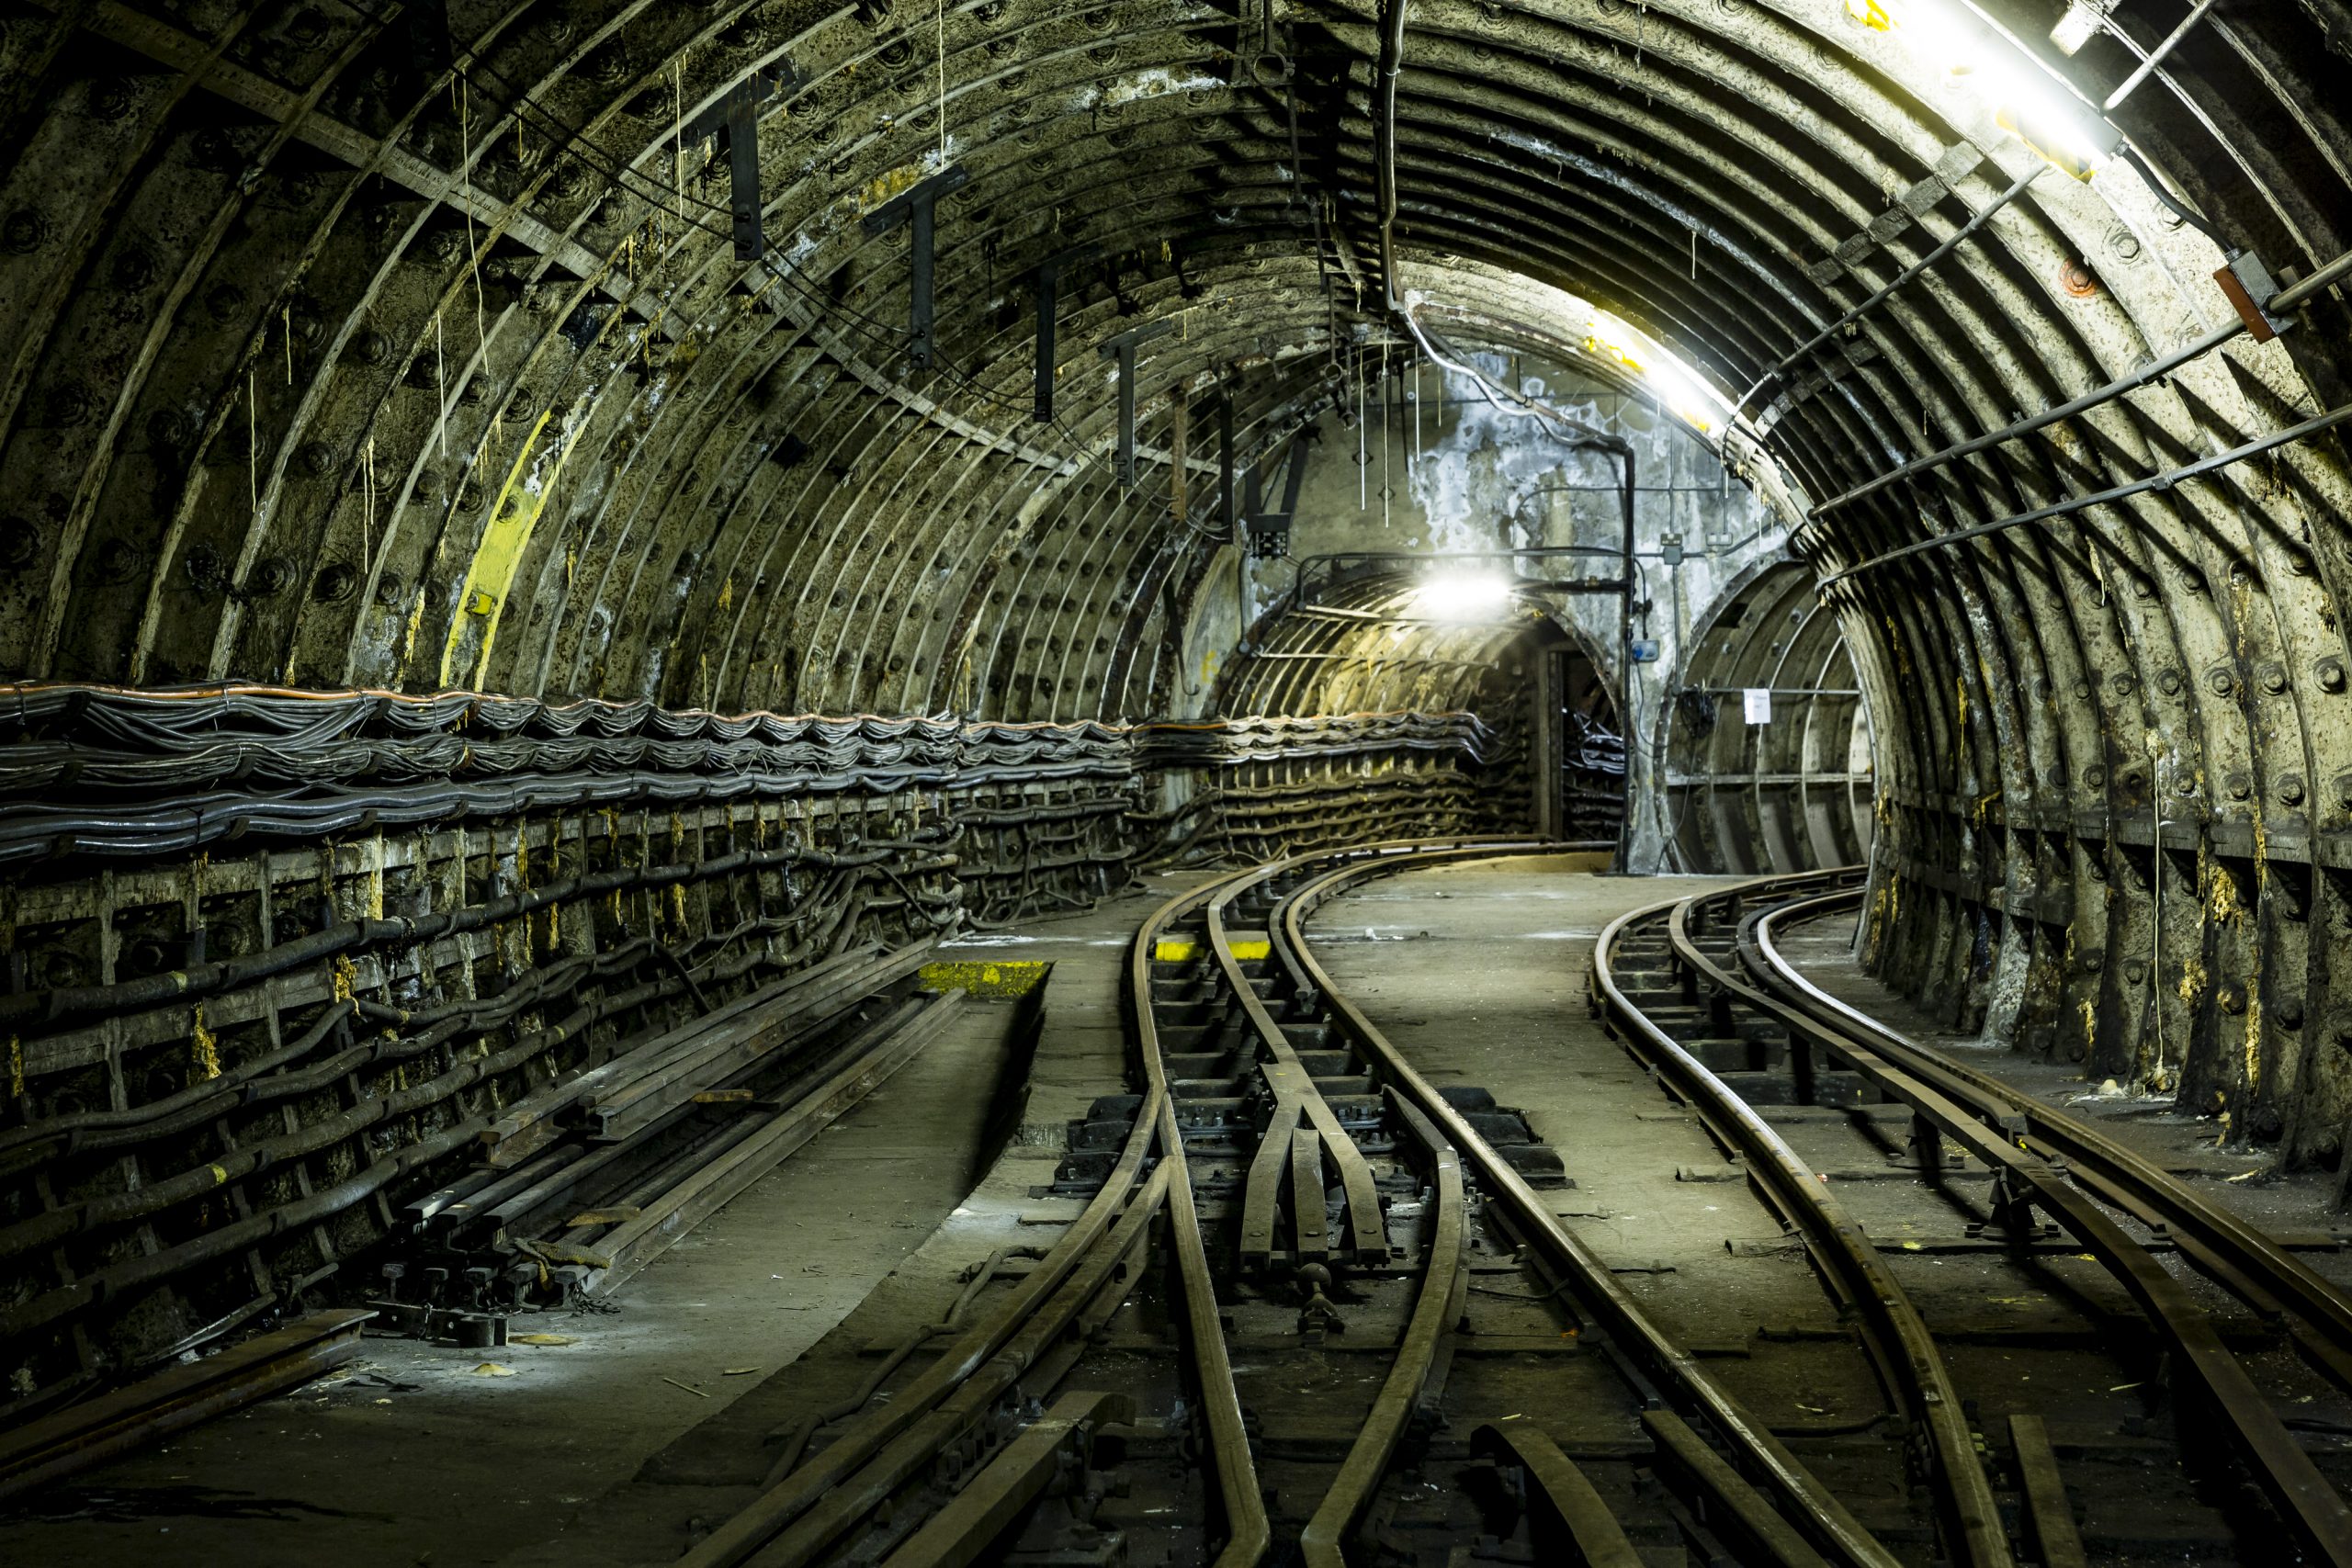 The Mail Rail tracks separating down two different tunnels.